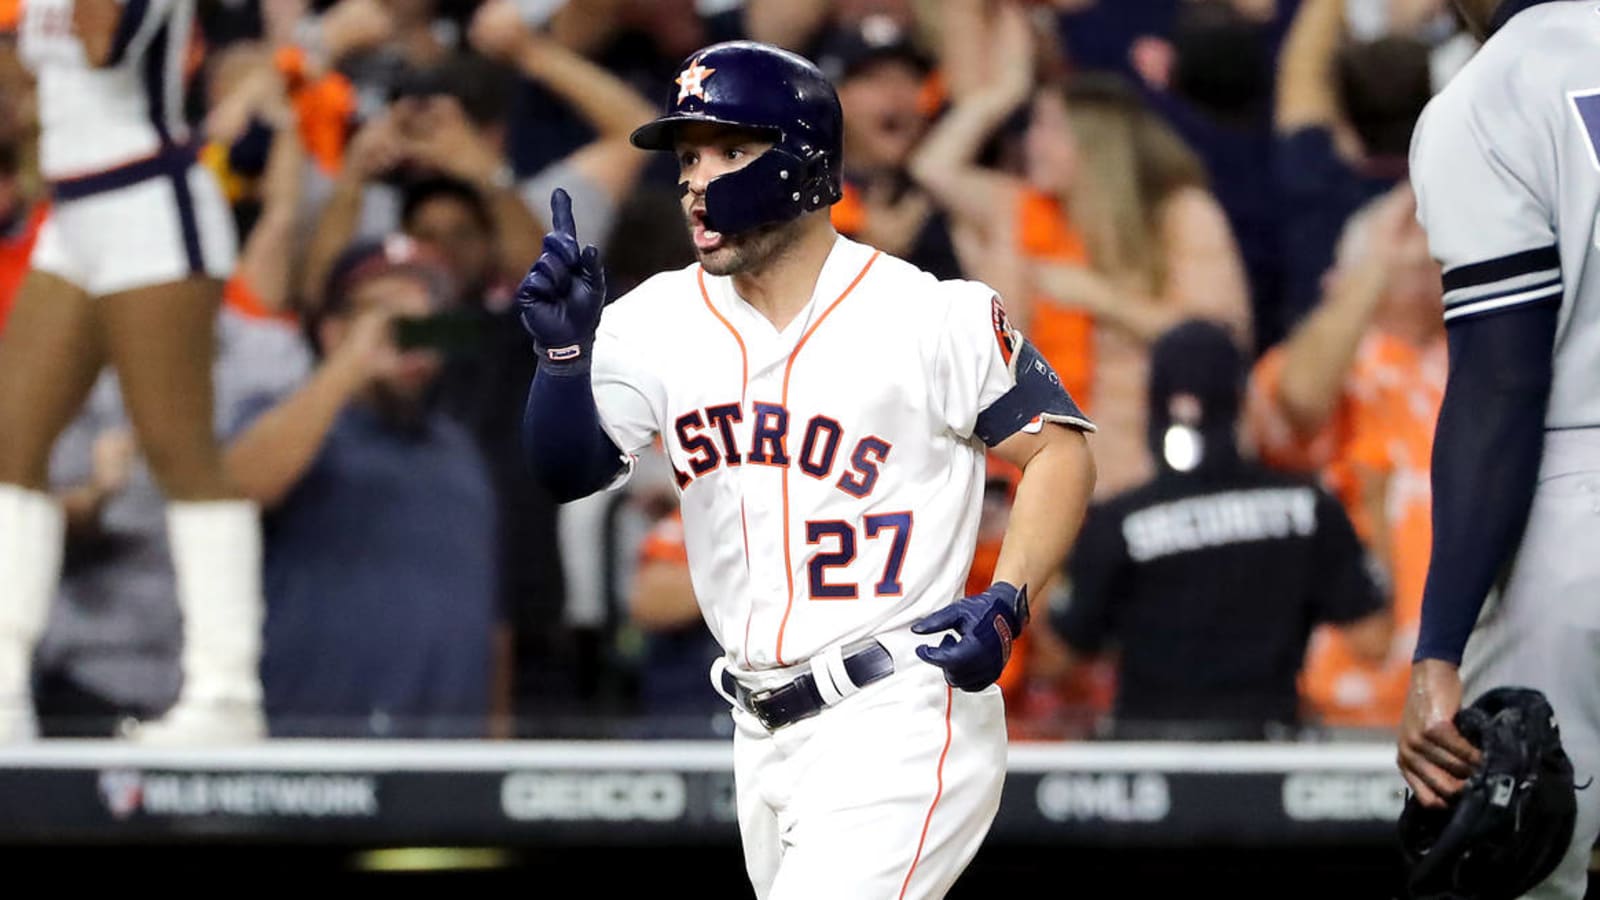 Altuve interview, jersey cover-up sparks buzzer speculation